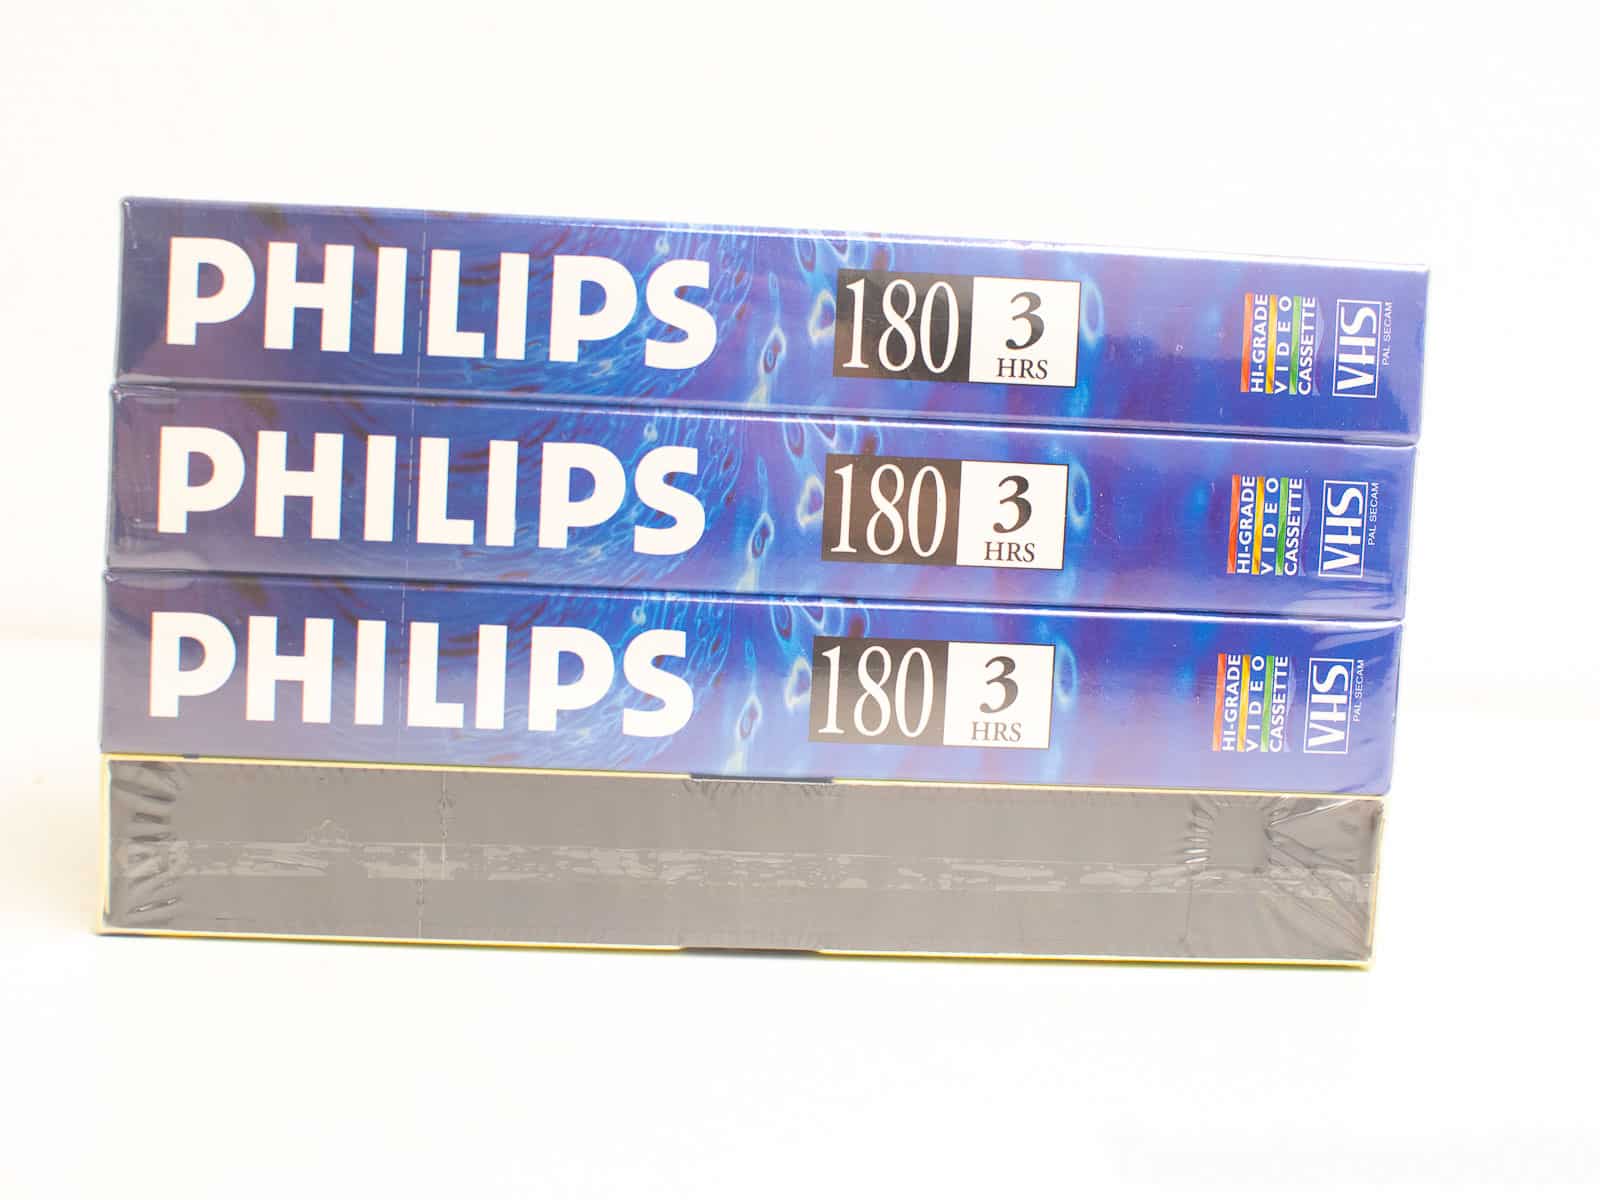 4 Philips vhs  23775